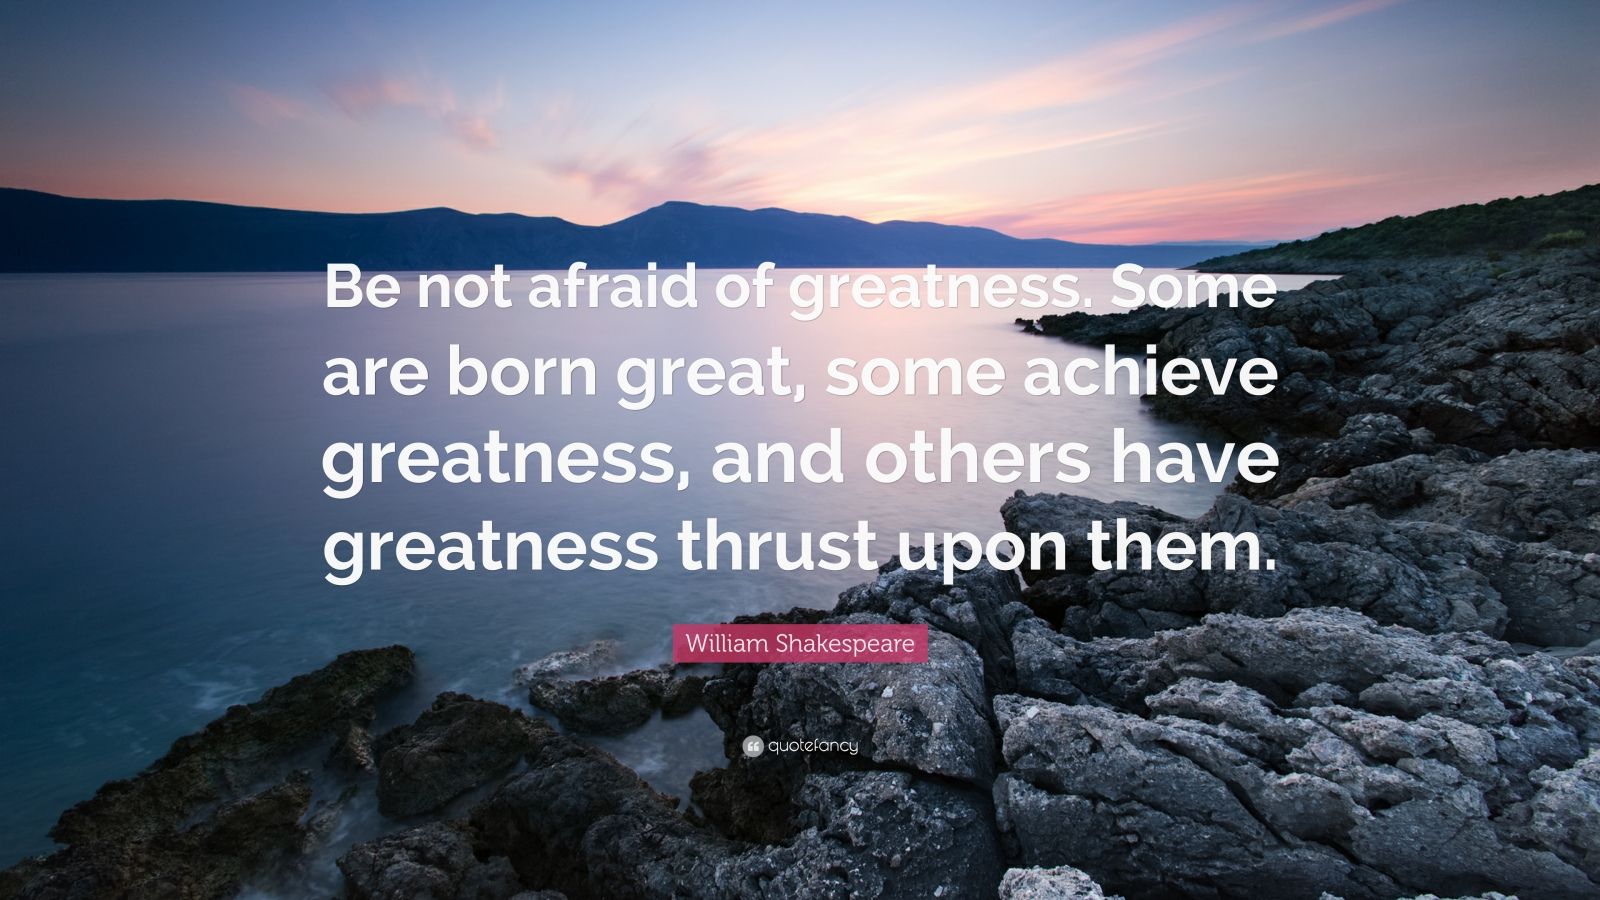 354017 William Shakespeare Quote Be not afraid of greatness Some are born